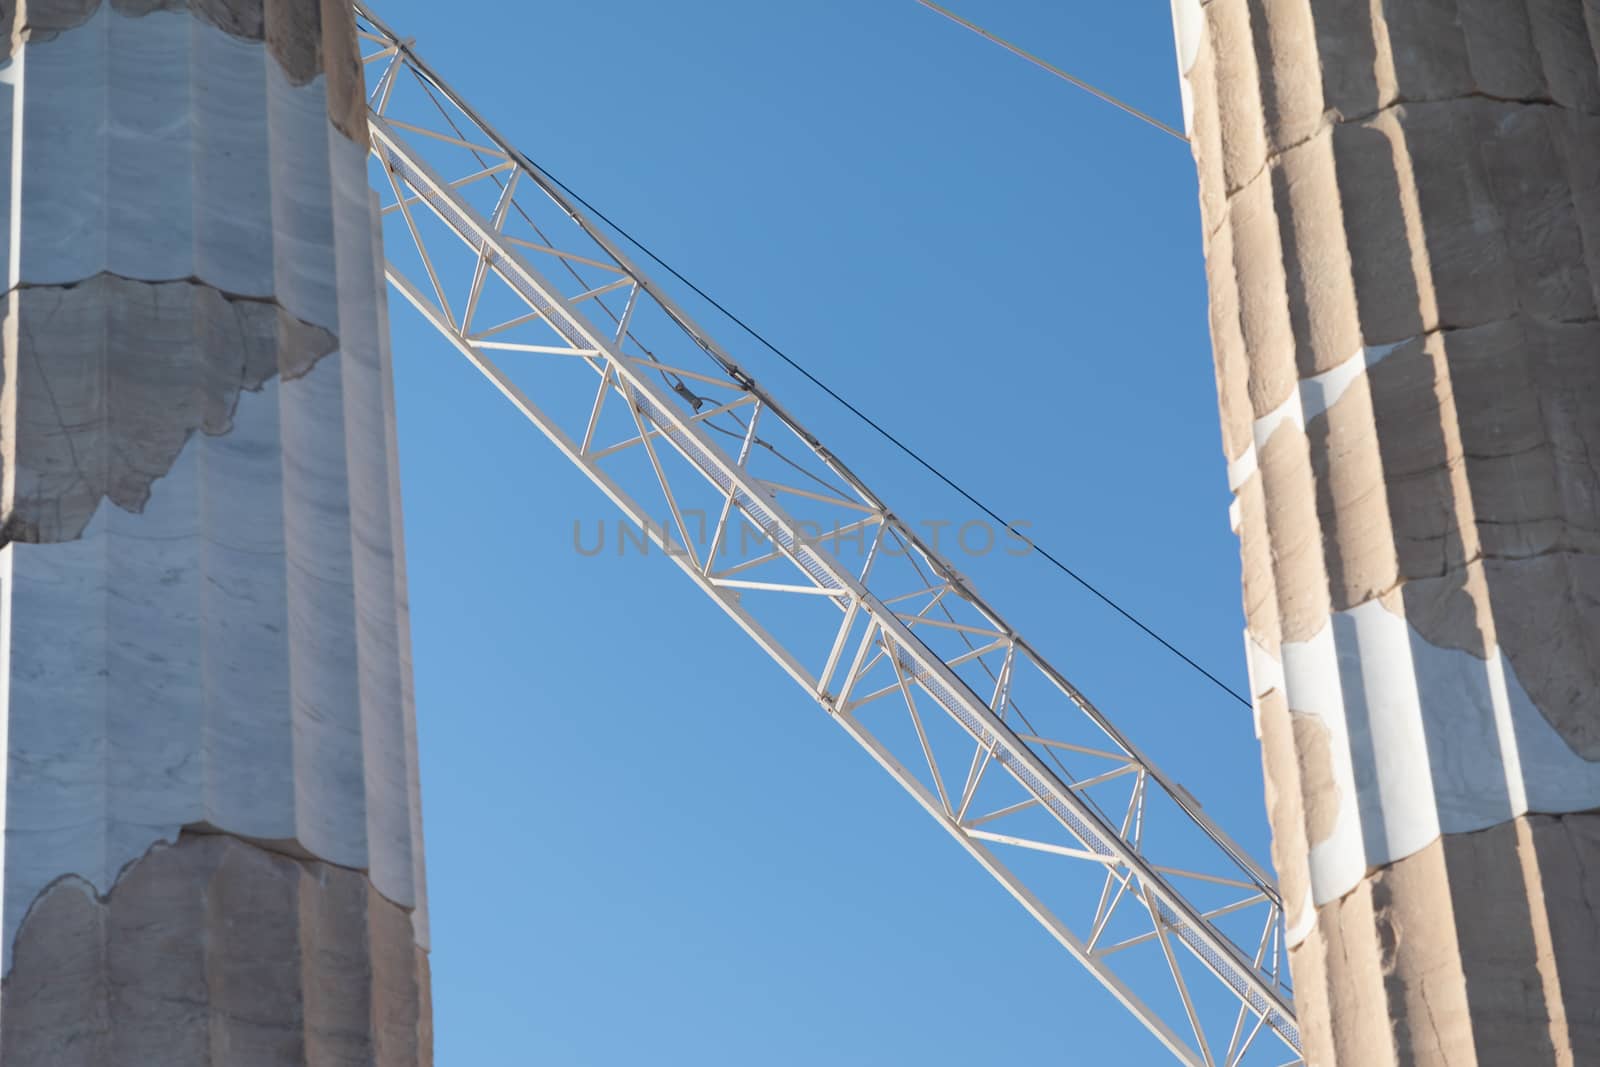 A construction crane behind old stone pillars with a bright blue sky in the background